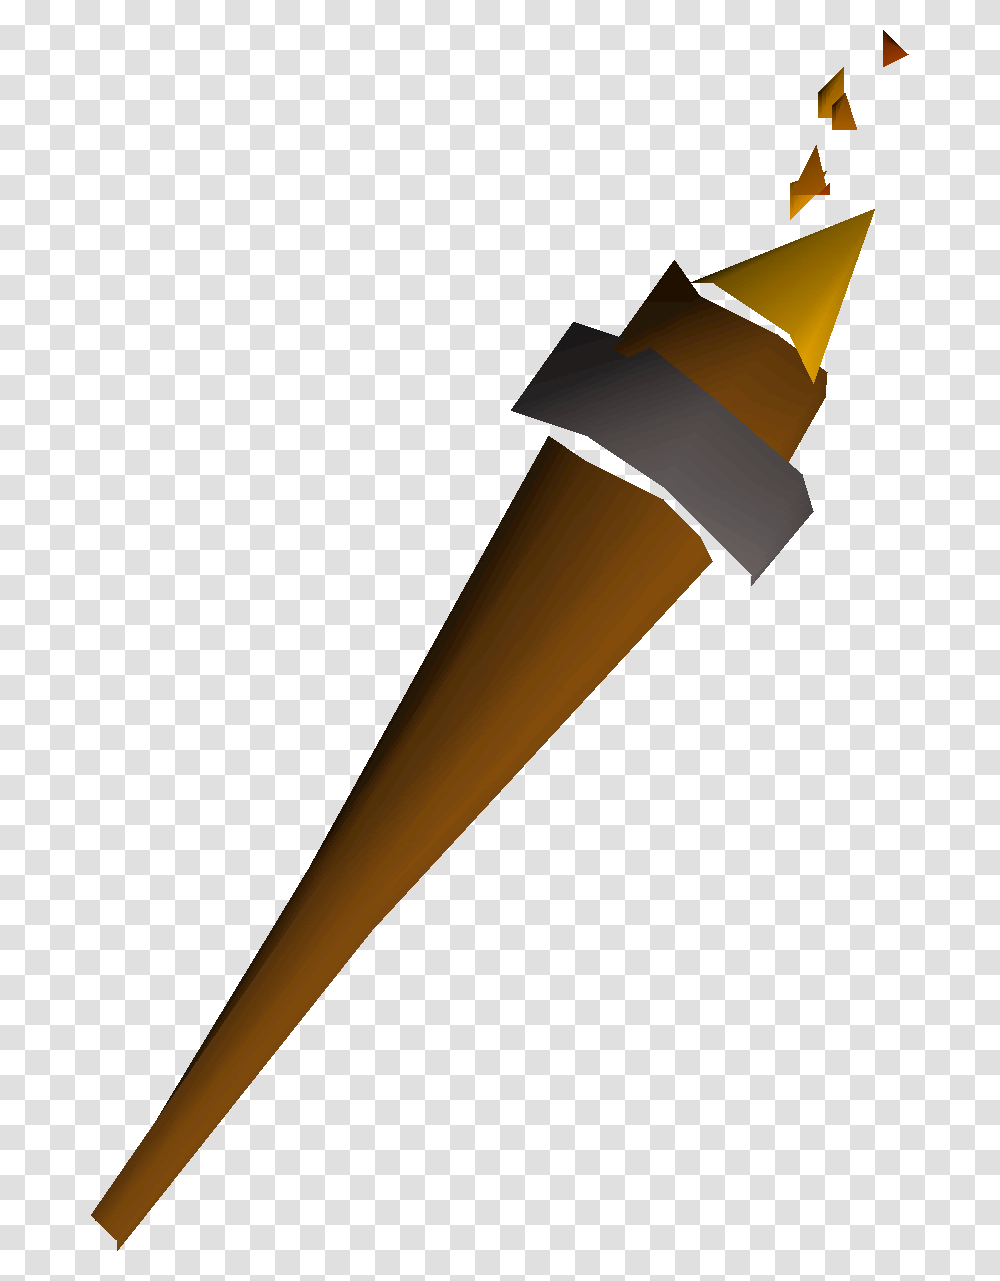 Old School Runescape Wiki, Light, Cone, Torch Transparent Png